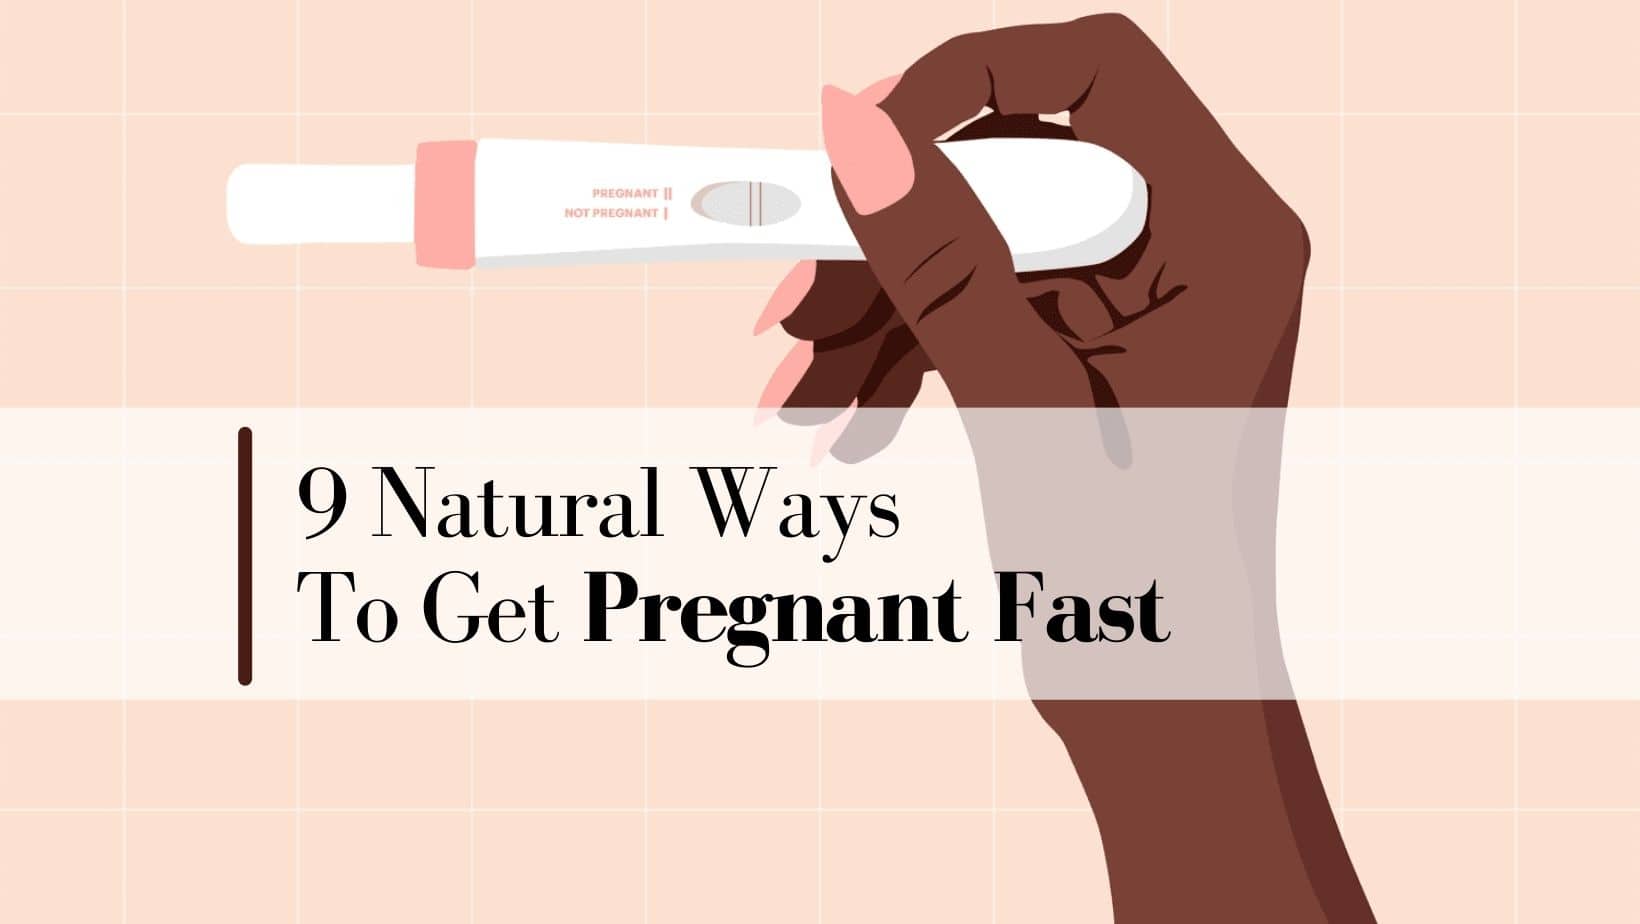 9 Tips For Getting Pregnant Faster